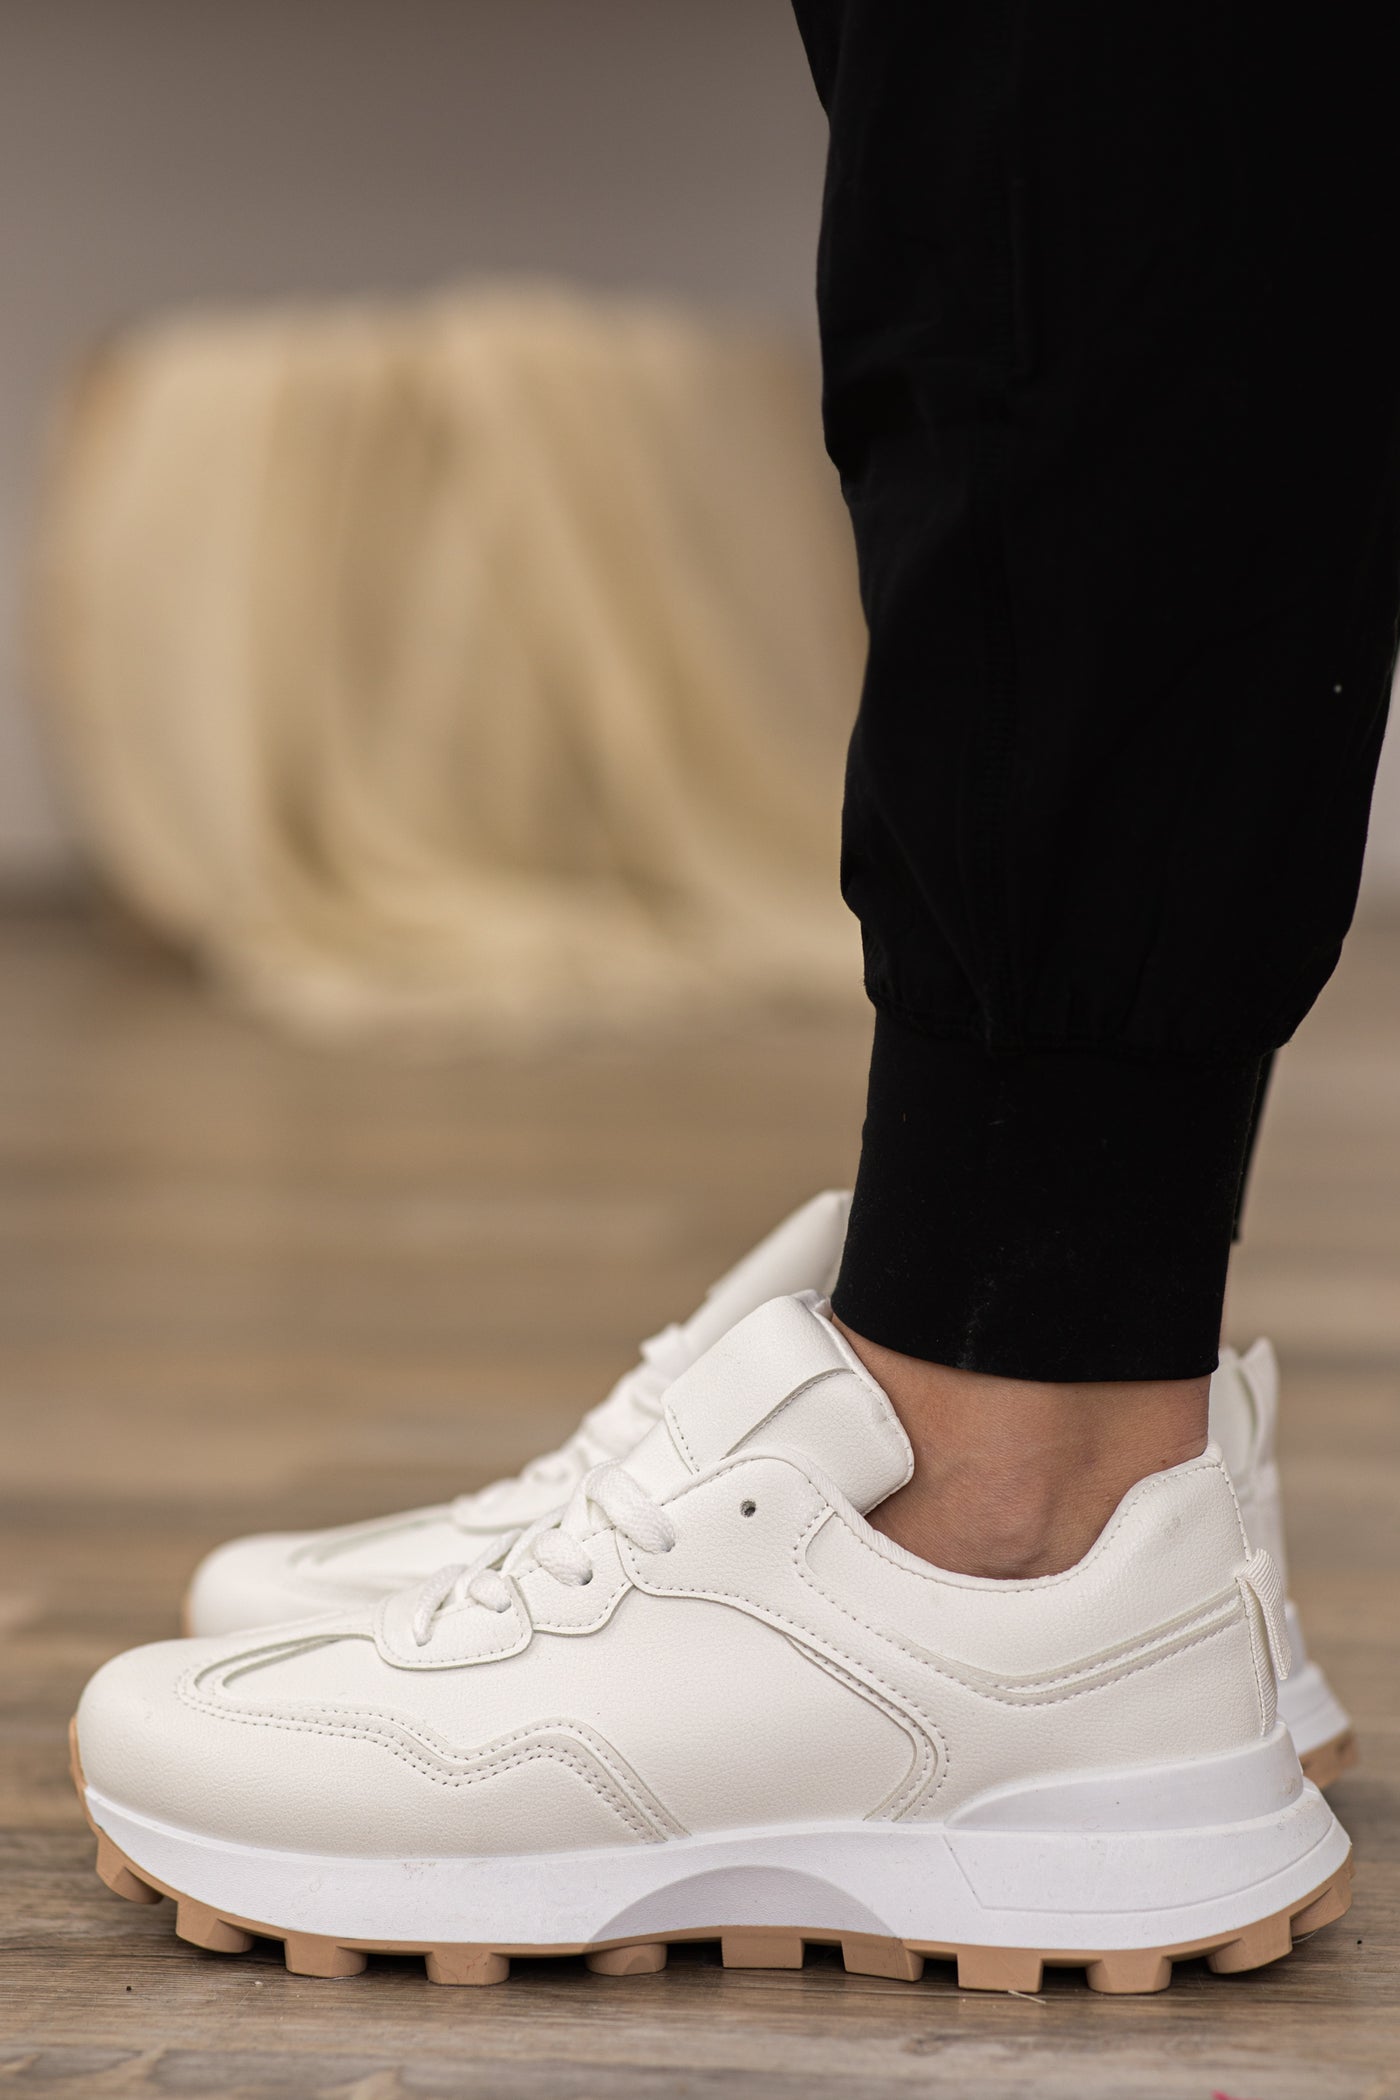 White Sneakers With Tan Sole